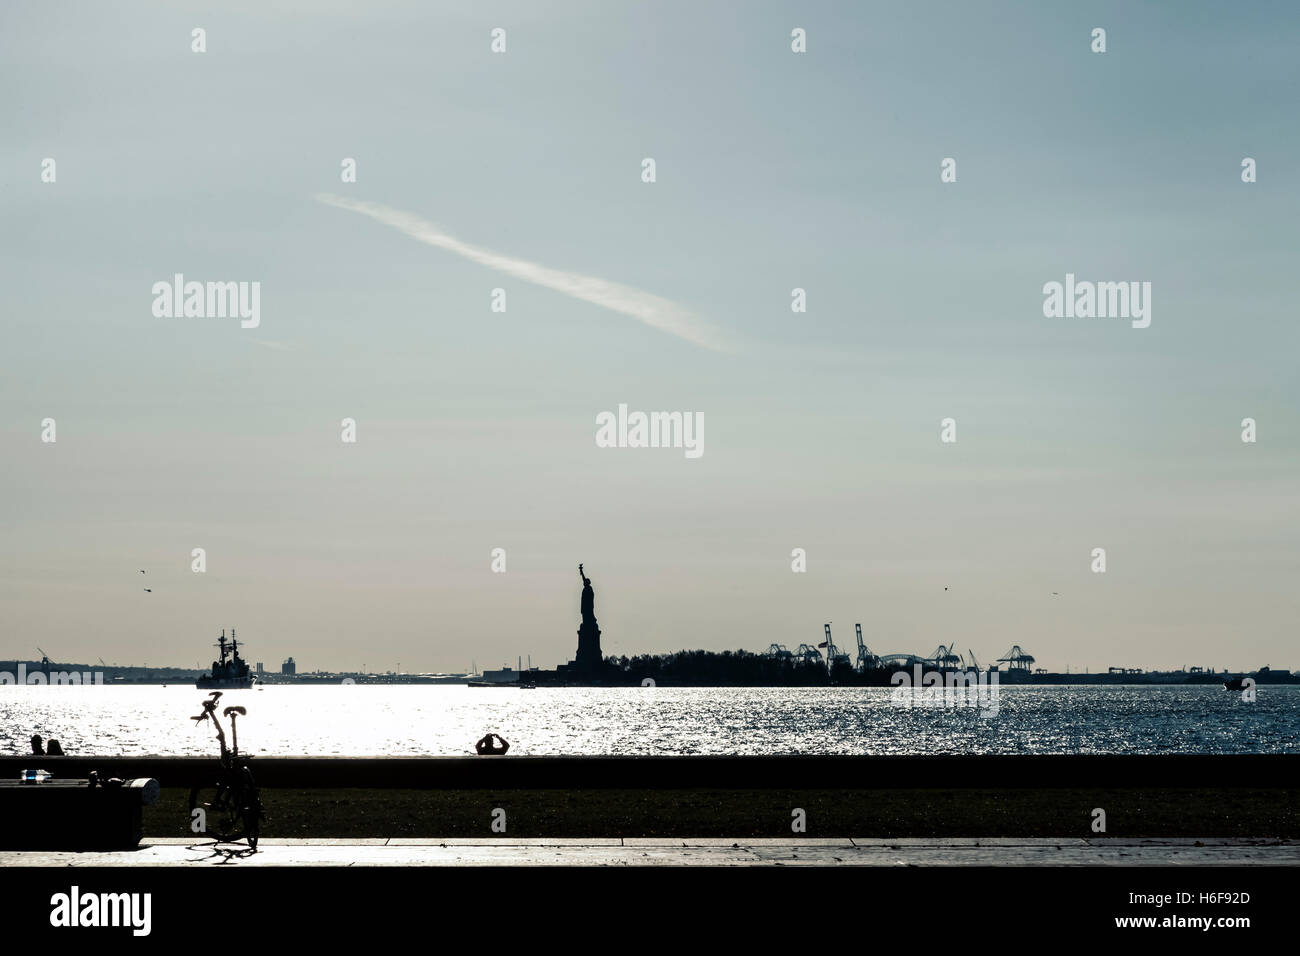 The recognizable silhouette of Statue of Liberty seen in the distance. Stock Photo